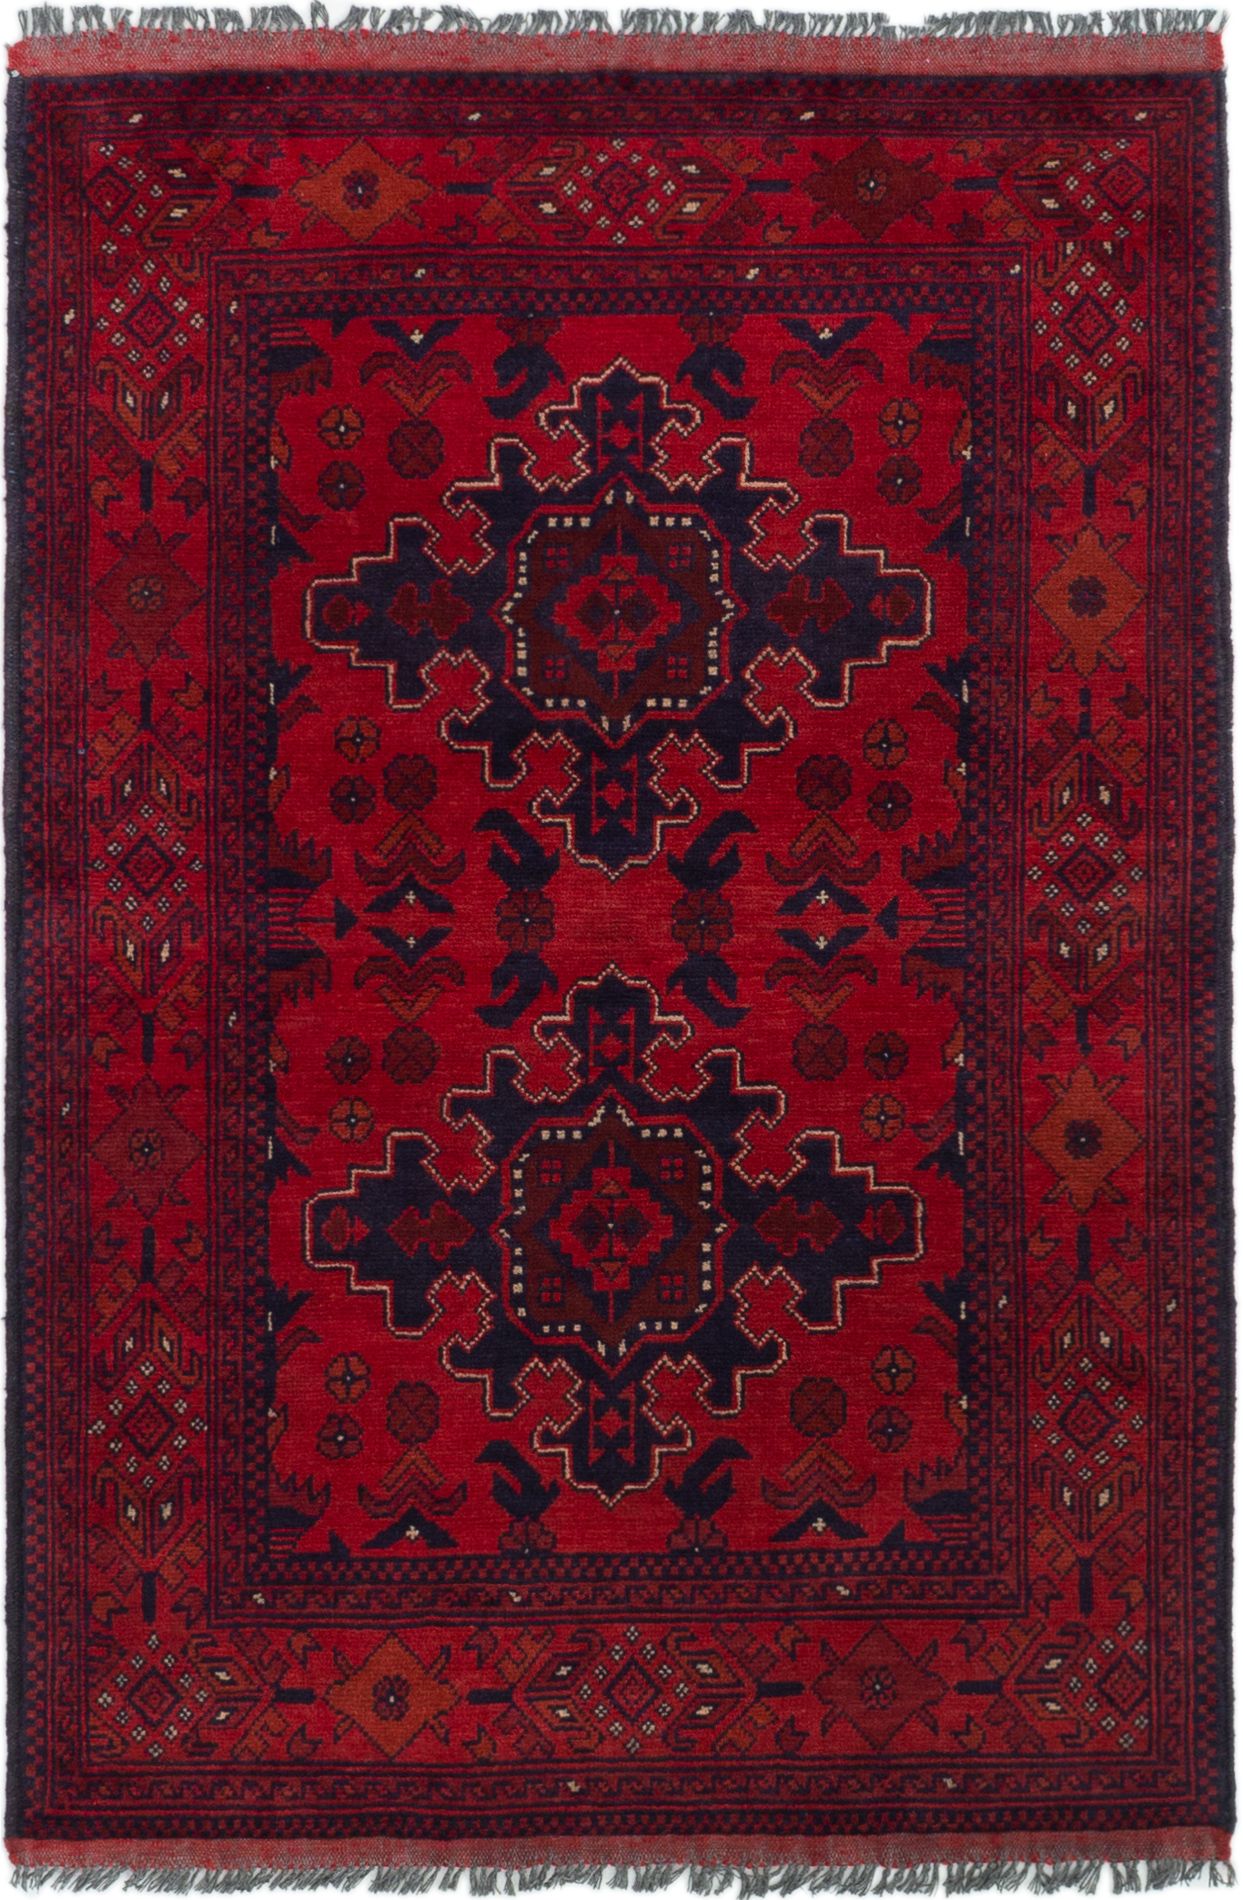 Hand-knotted Finest Khal Mohammadi Red Wool Rug 3'4" x 5'0" (26) Size: 3'4" x 5'0"  